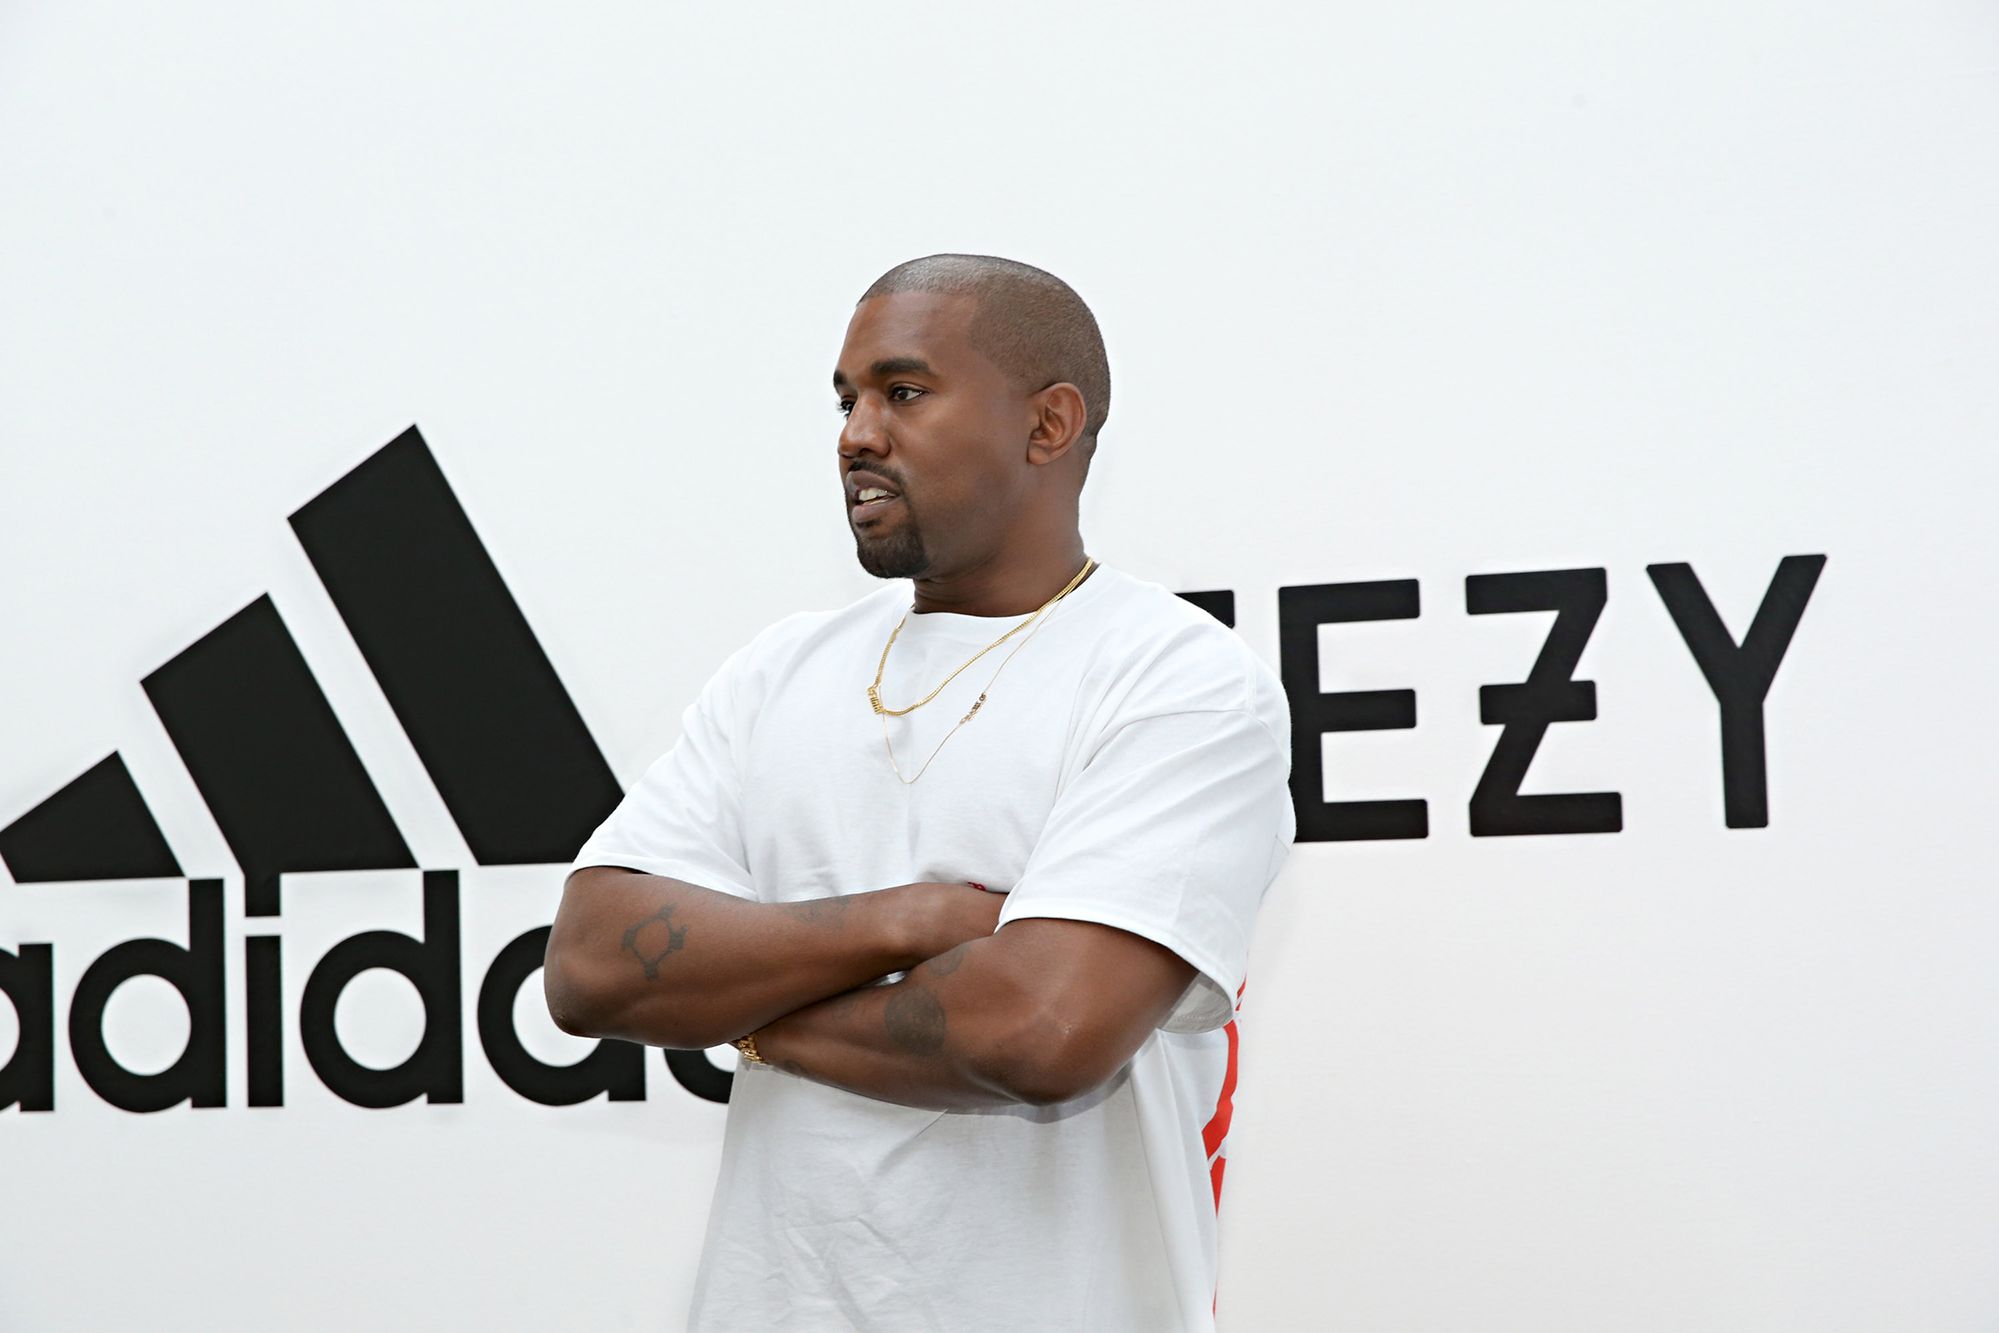 Yeezy without the Ye? Who is new "sole" owner CNN Business